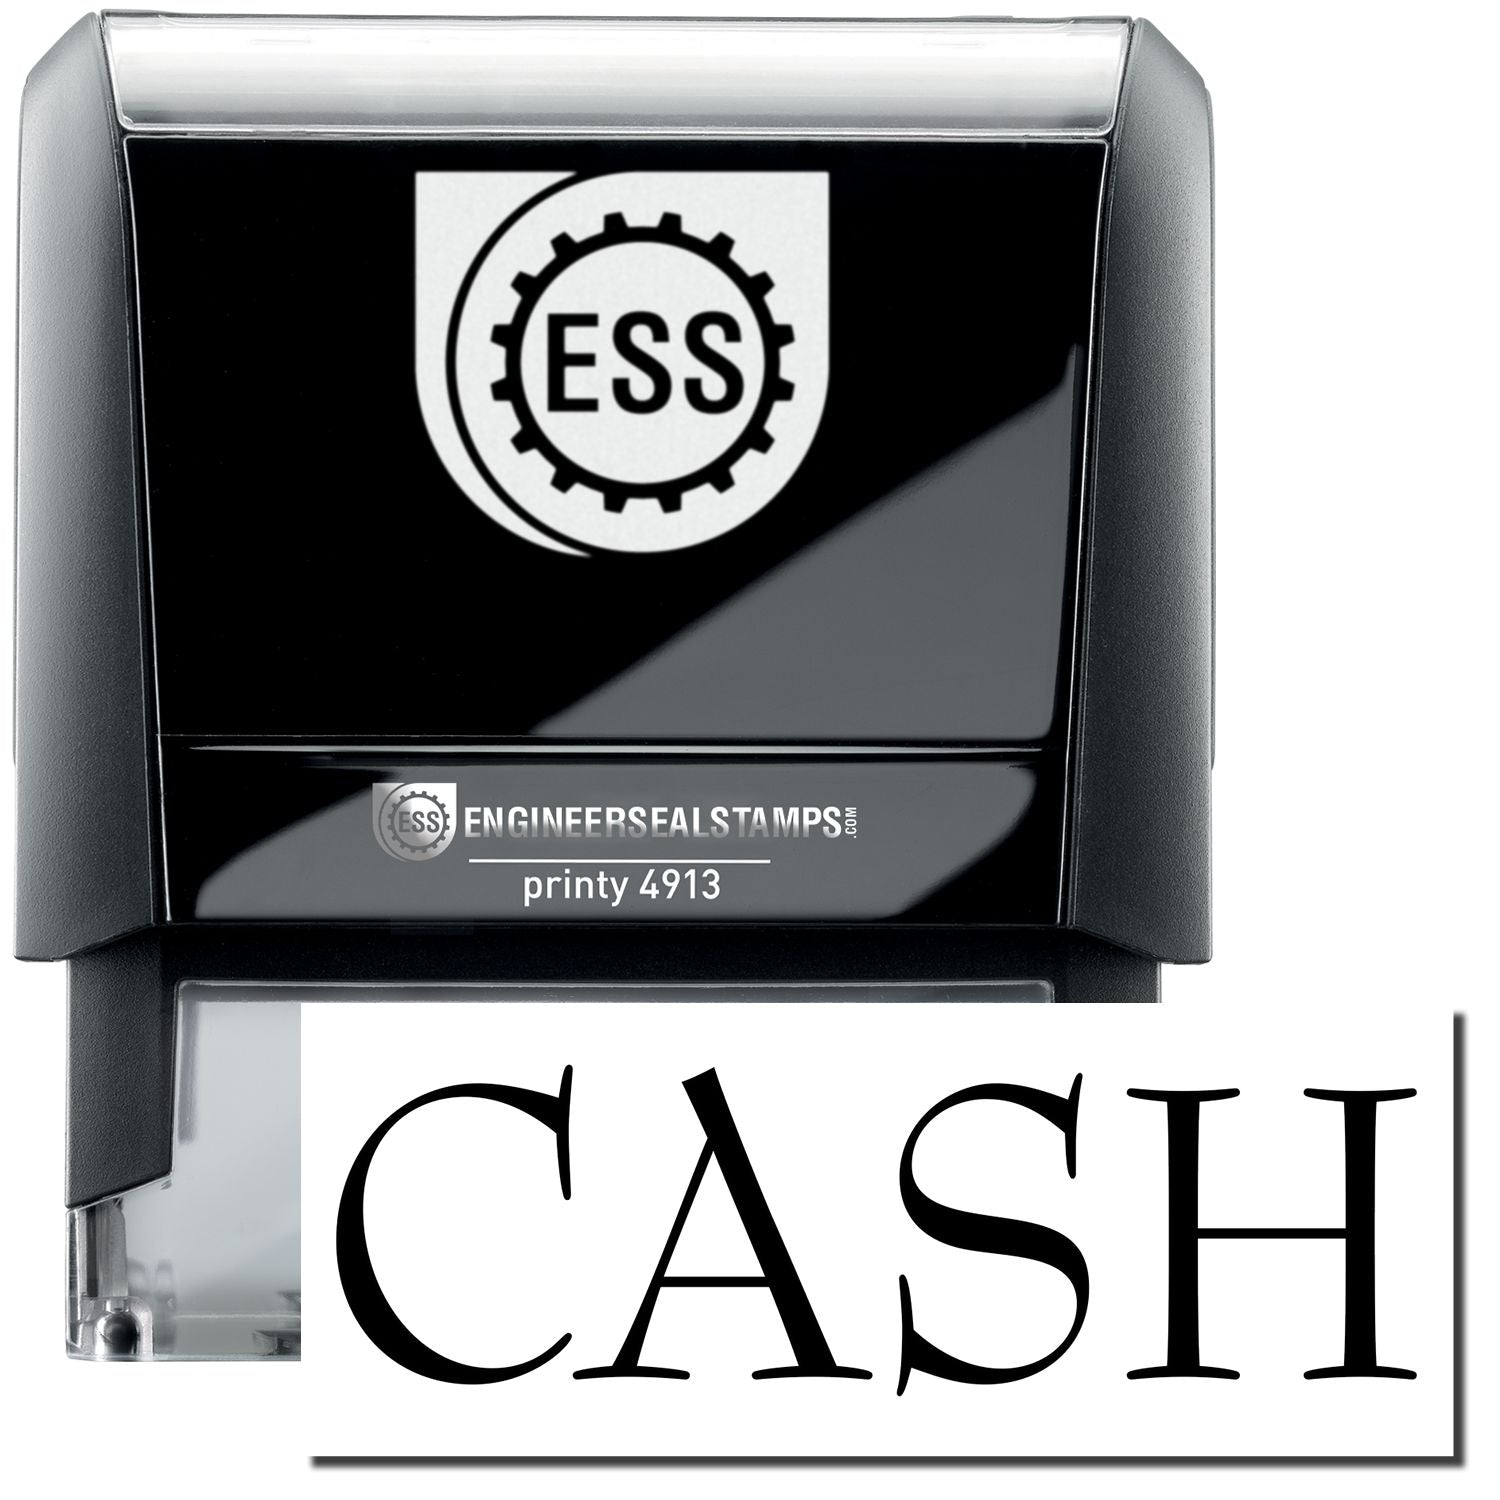 A self-inking stamp with a stamped image showing how the text "CASH" in a large bold font is displayed by it.